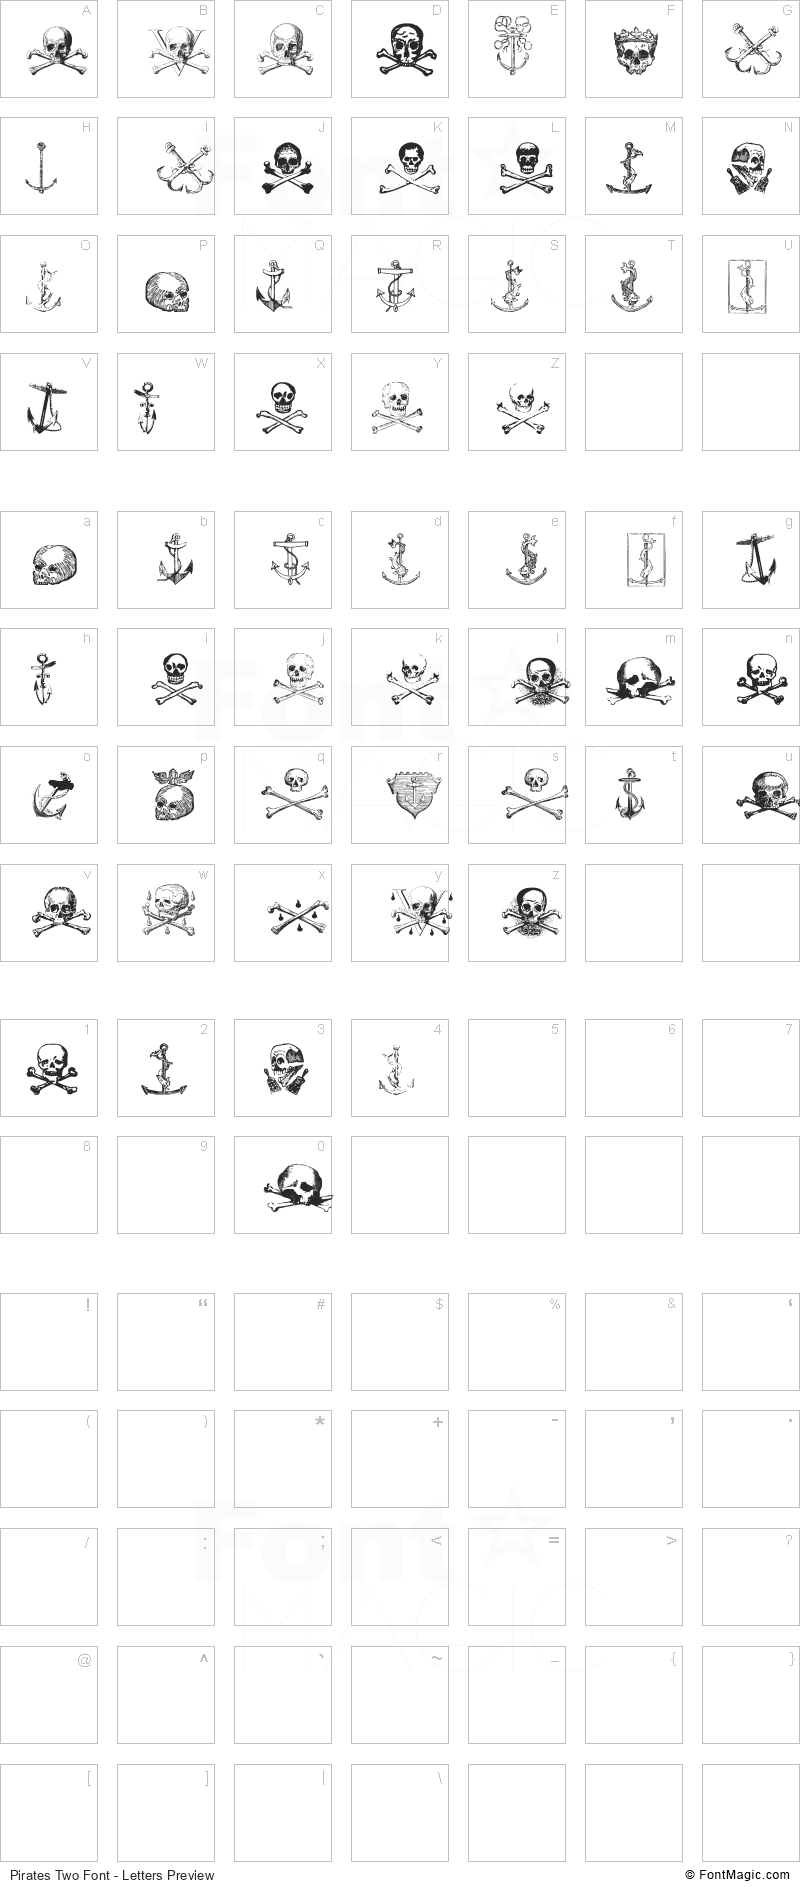 Pirates Two Font - All Latters Preview Chart